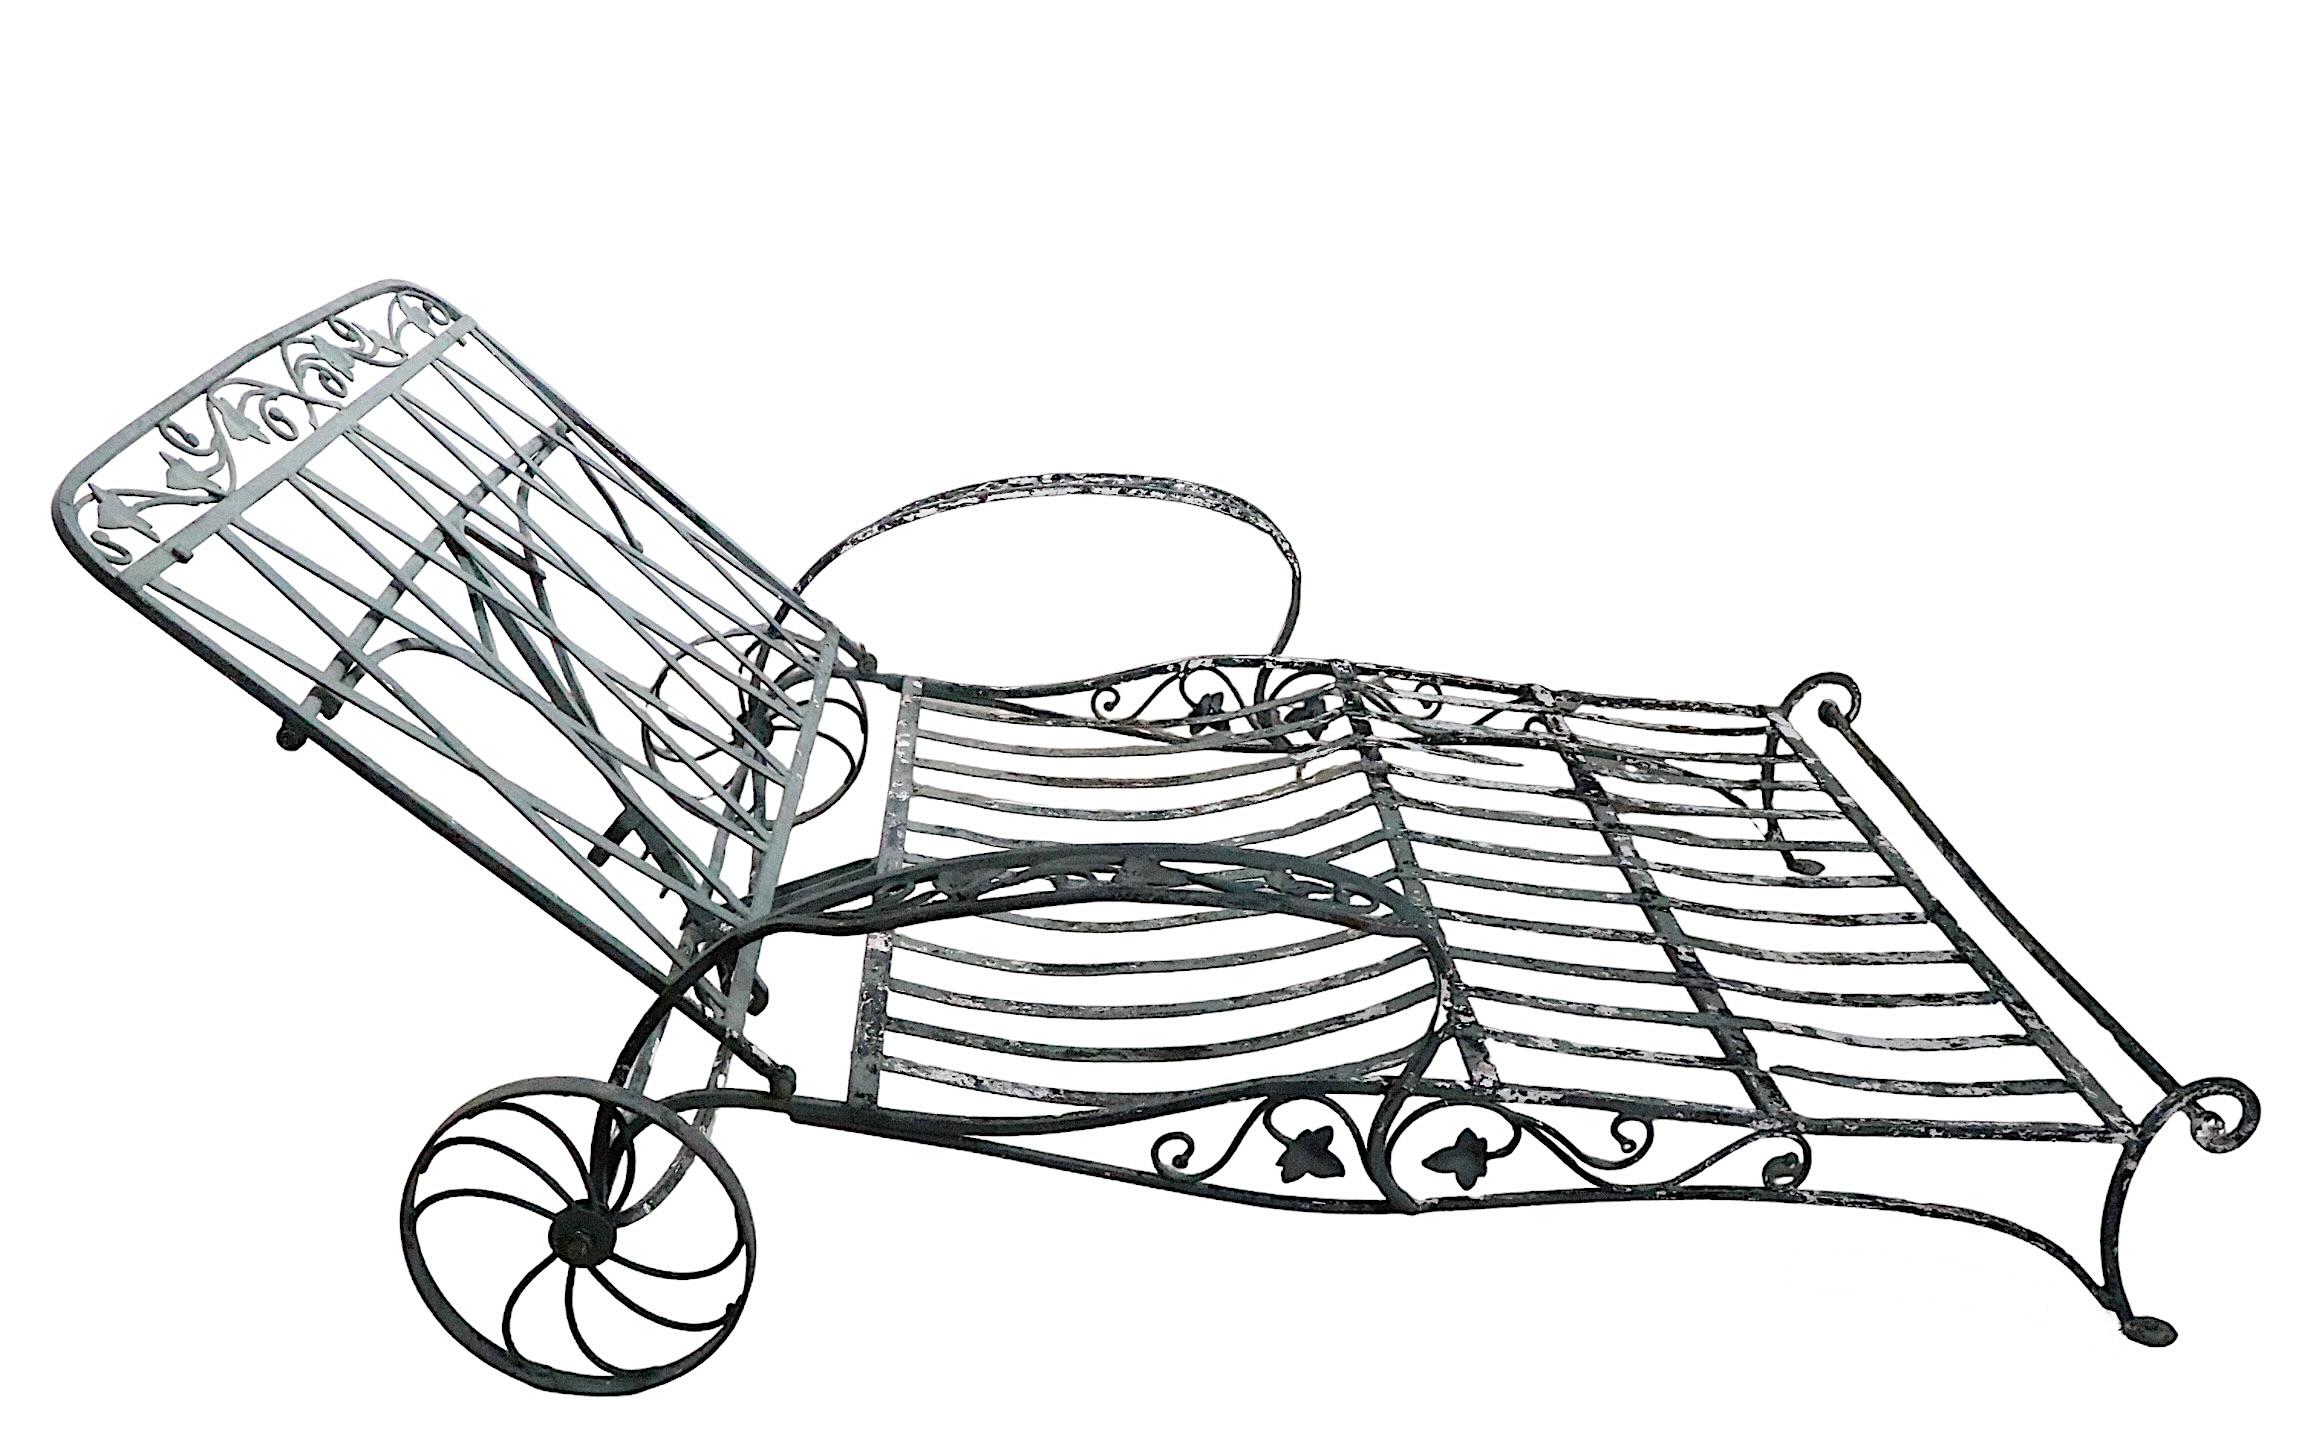  Wrought Iron Garden Patio  Double Wide Reclining Chaise Lounge by Salterini  5